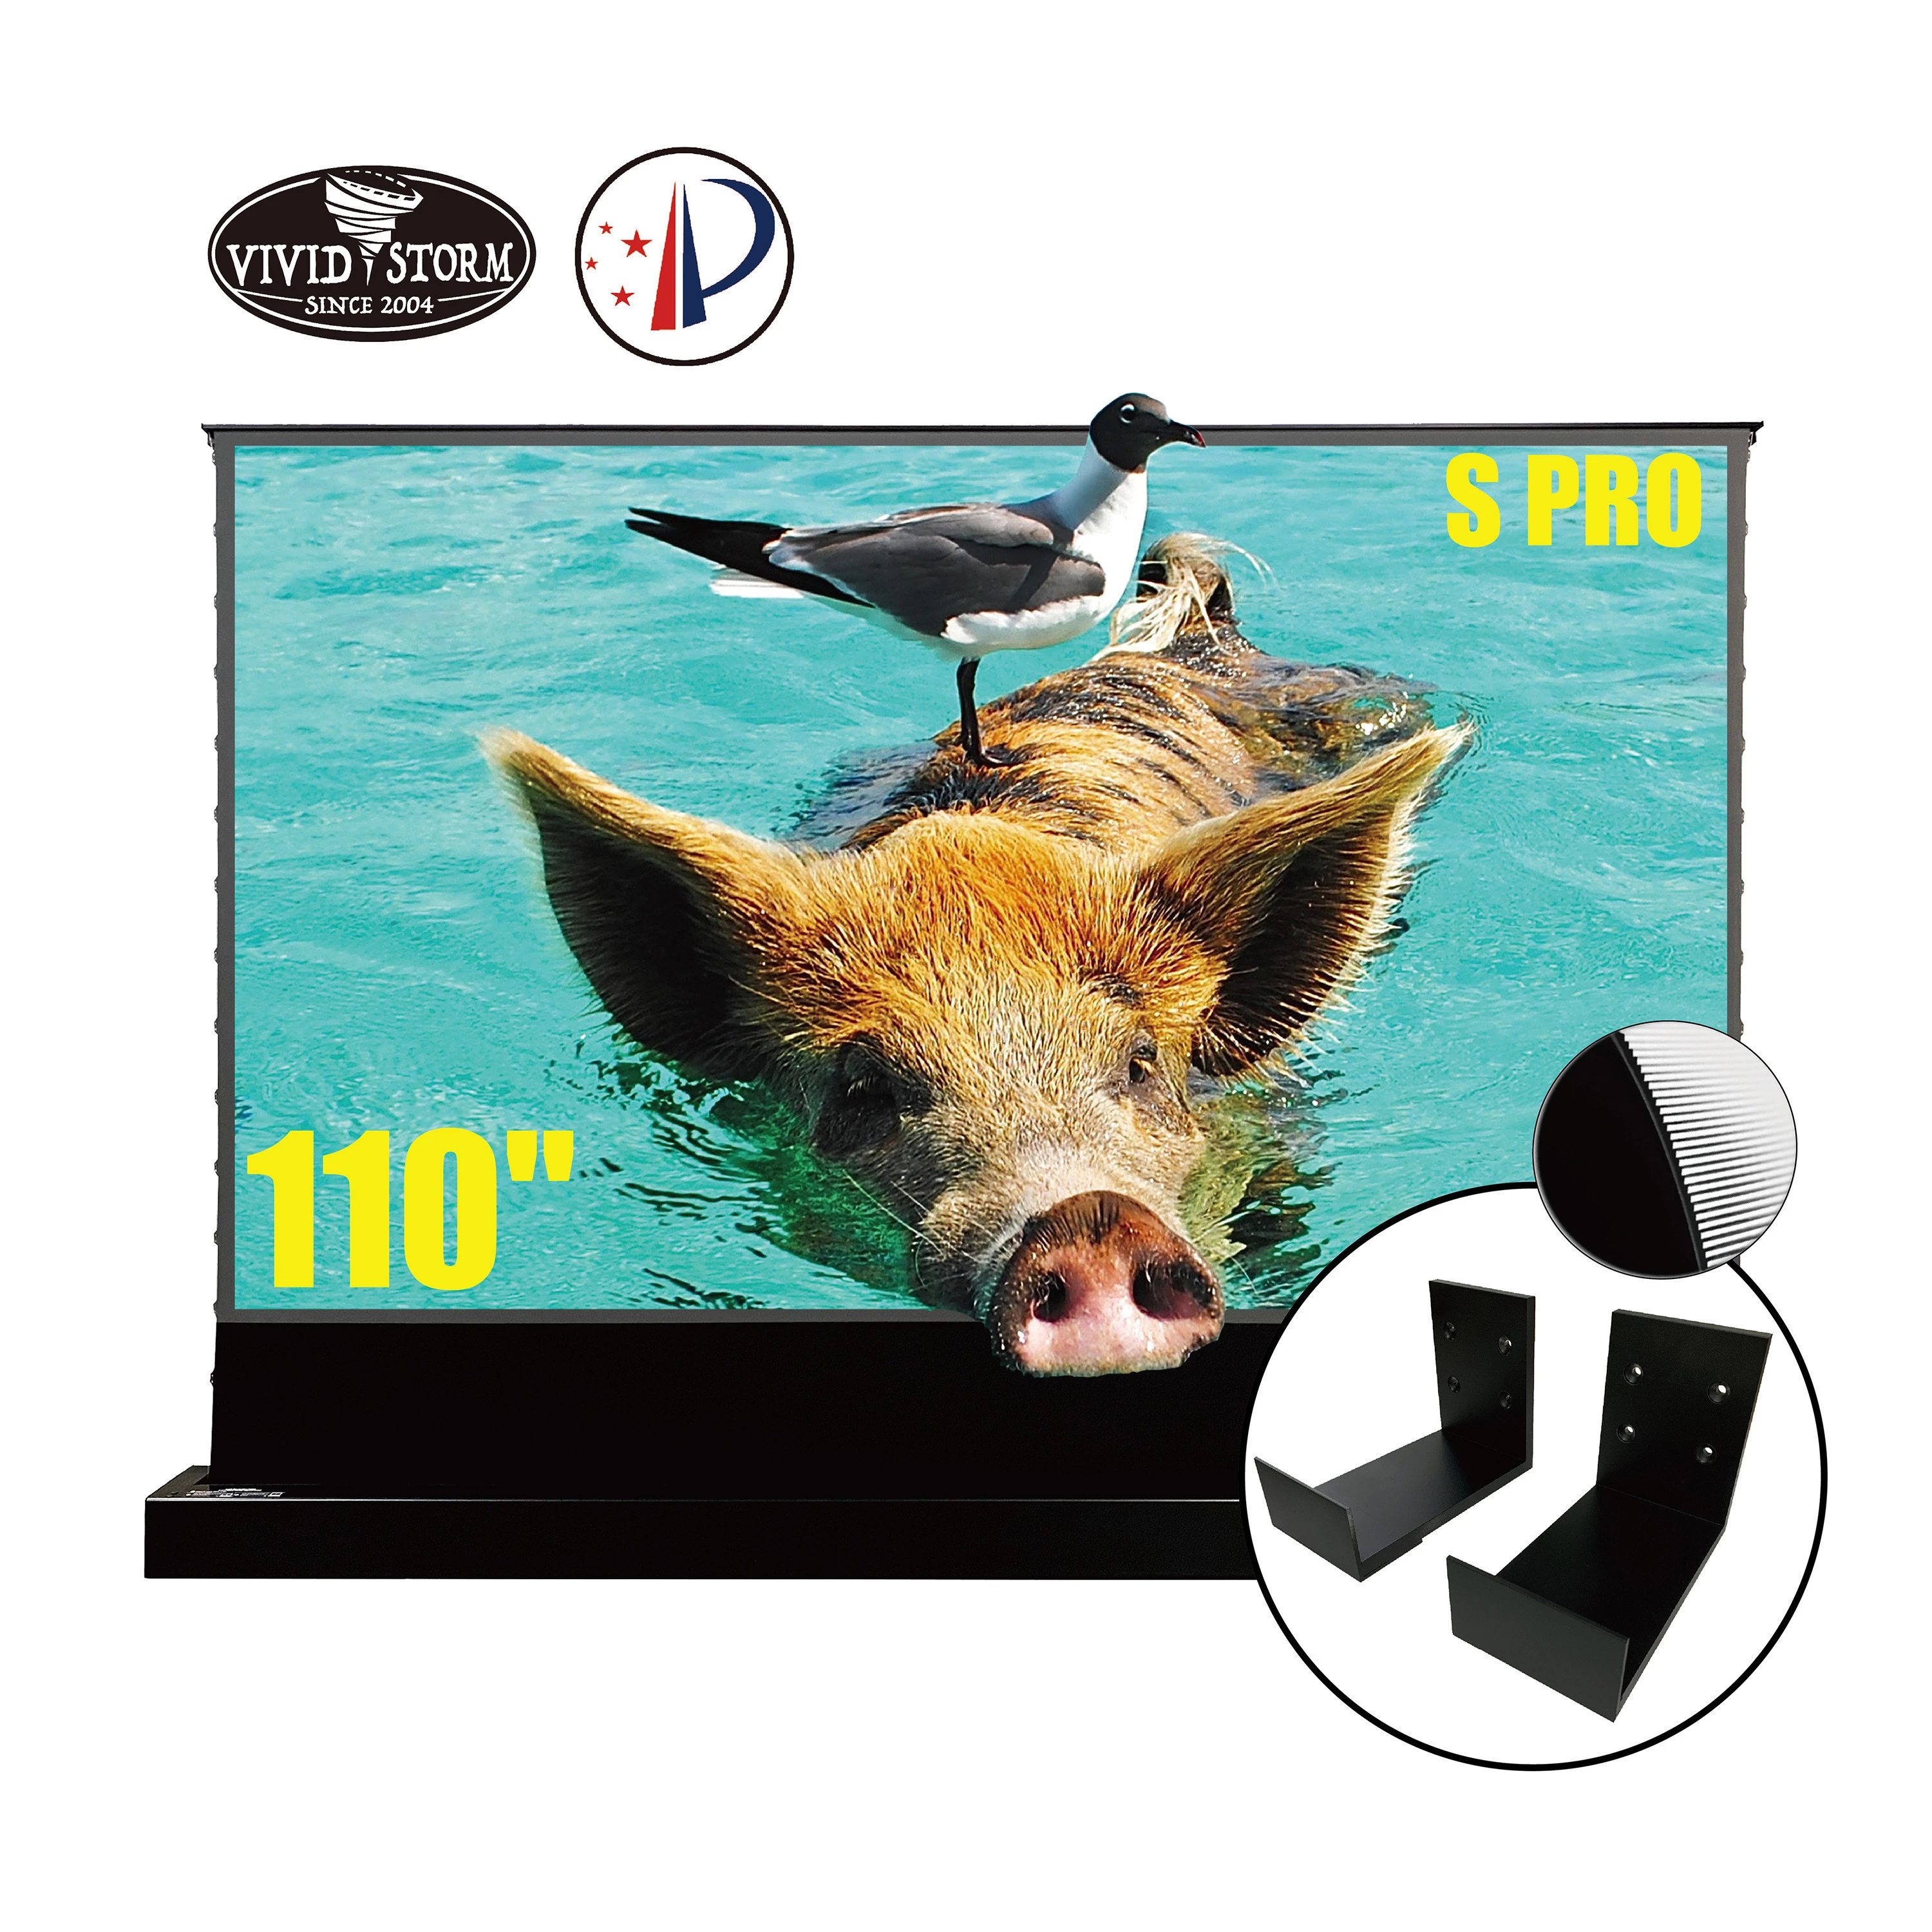 S Pro 110-inch 16:9 ALR 4K TV Tension Smart floor rising ALR projection screen and wall bracket